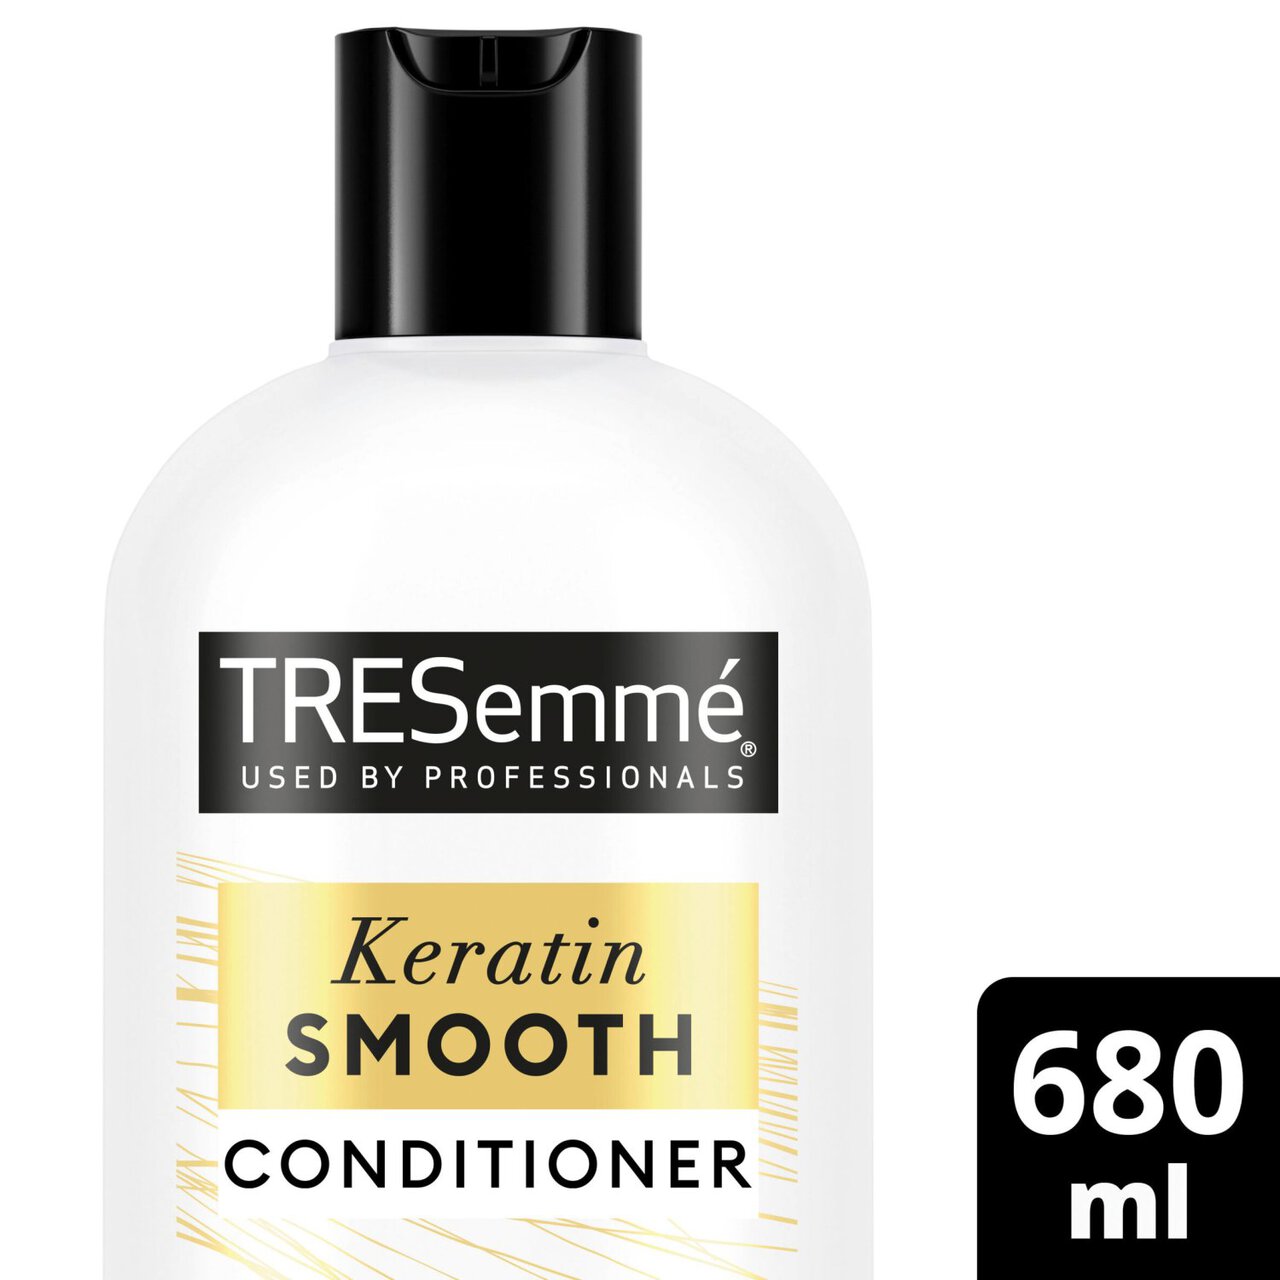 TRESemme KERATIN SMOOTH Conditioner 680ml